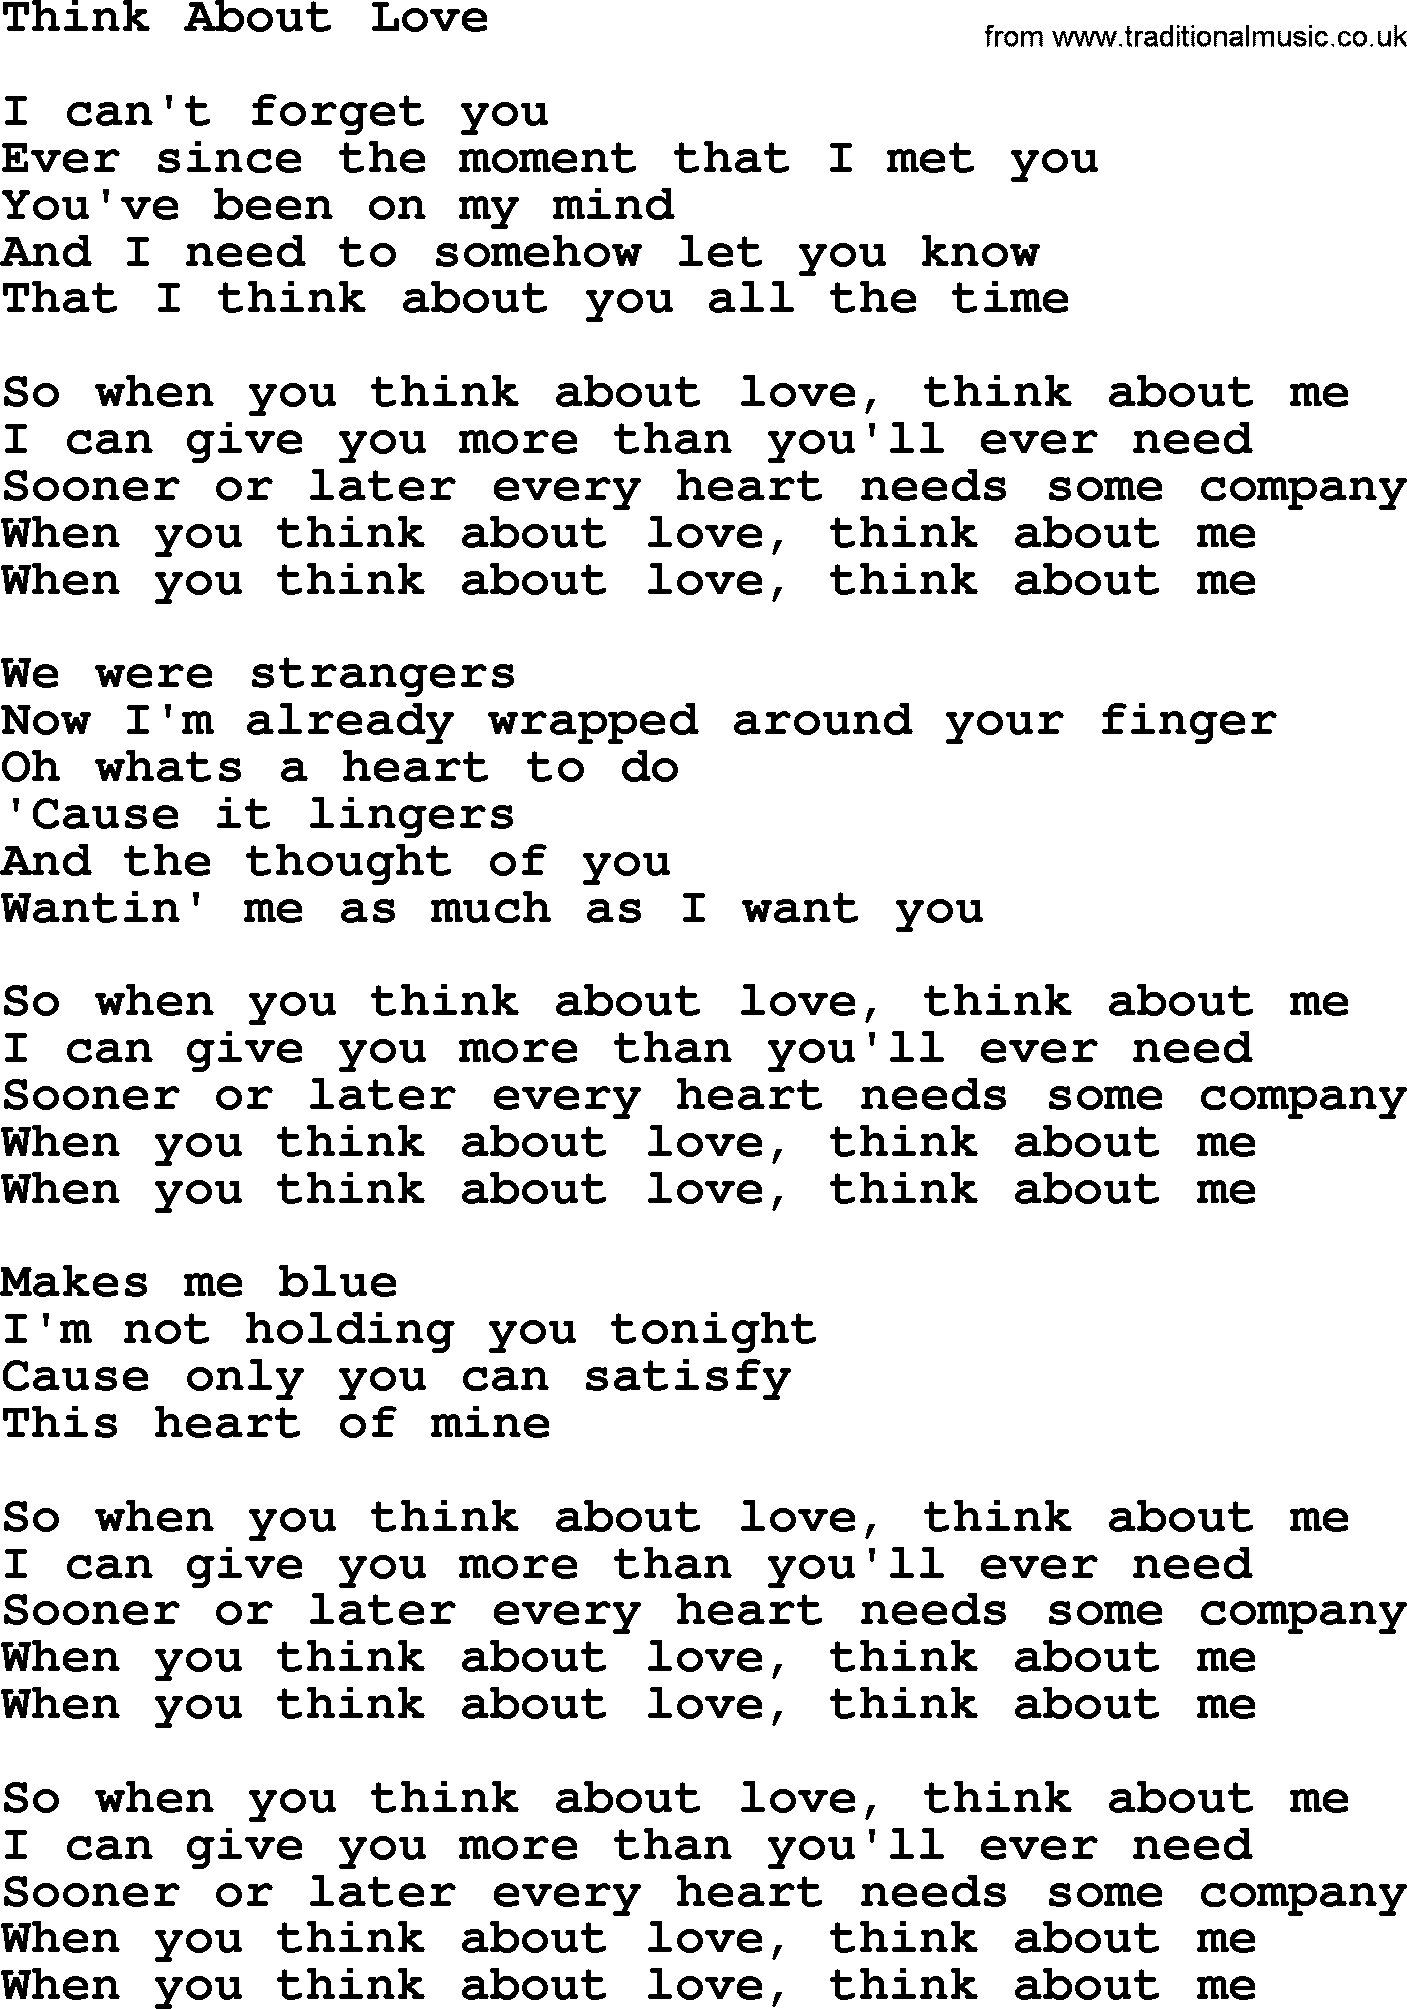 Dolly Parton song Think About Love.txt lyrics